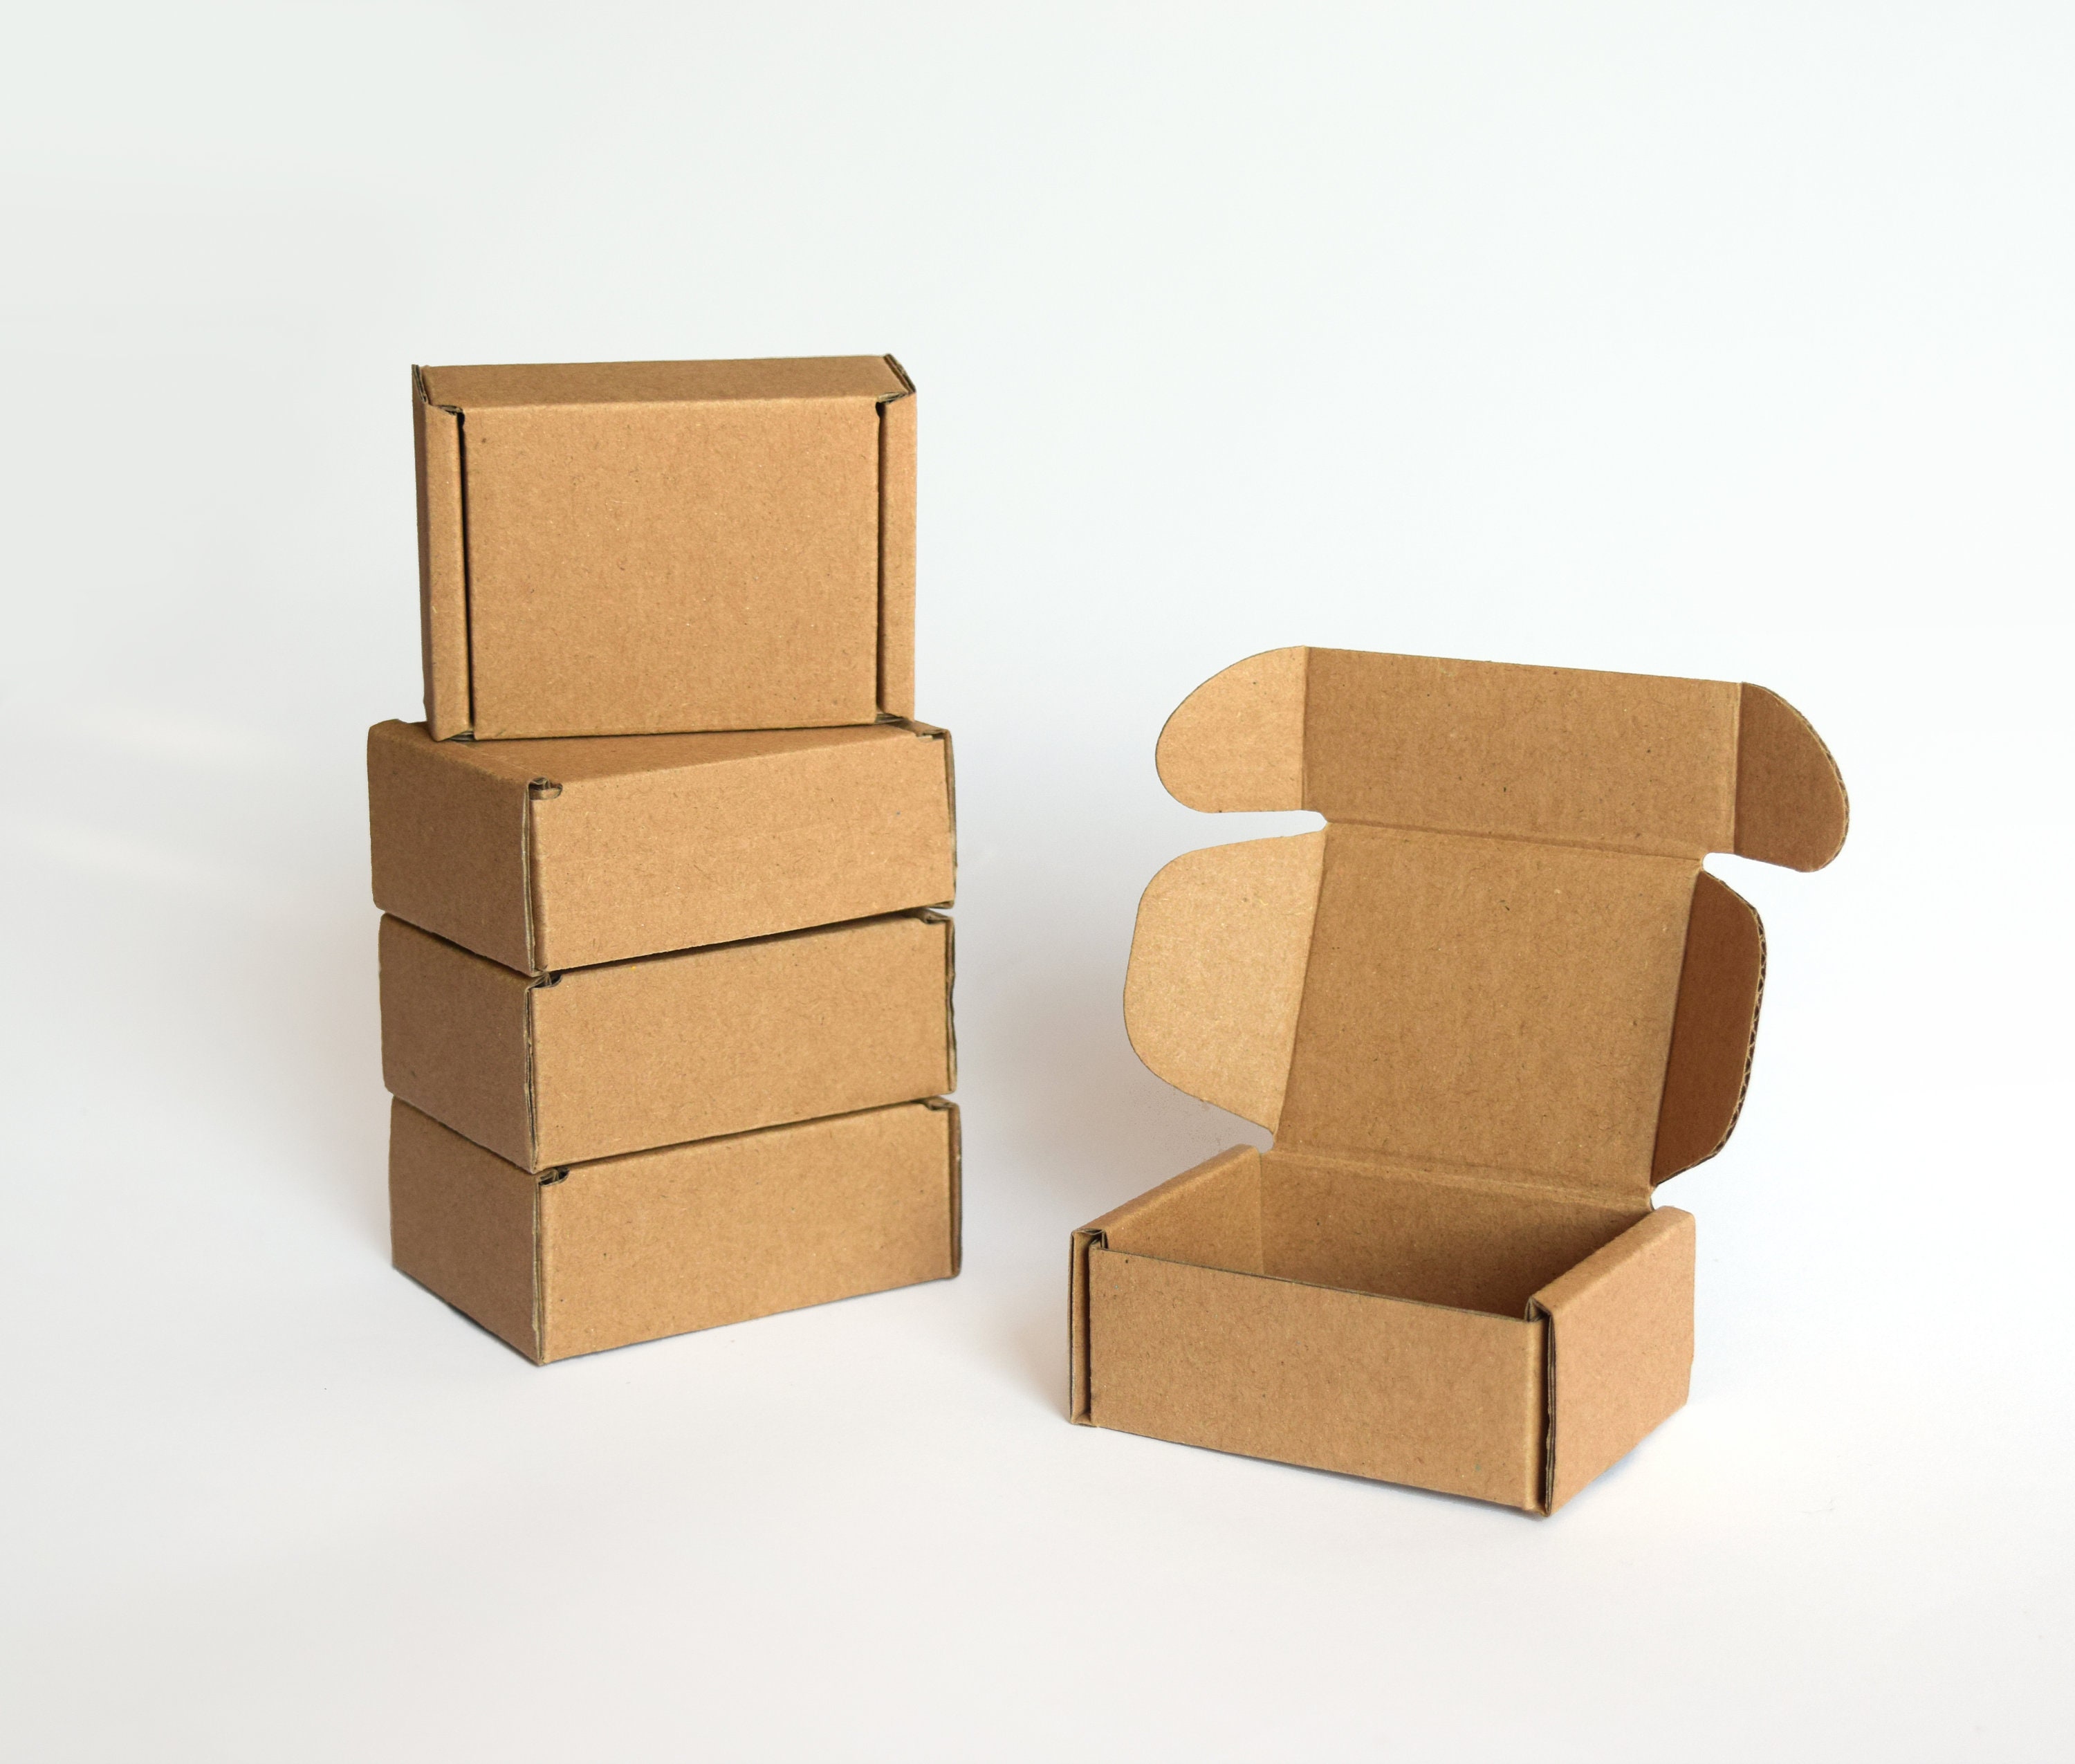 20x Tiny Shipping Boxes, Small Parcel Flat Shipping Boxes, Mailers